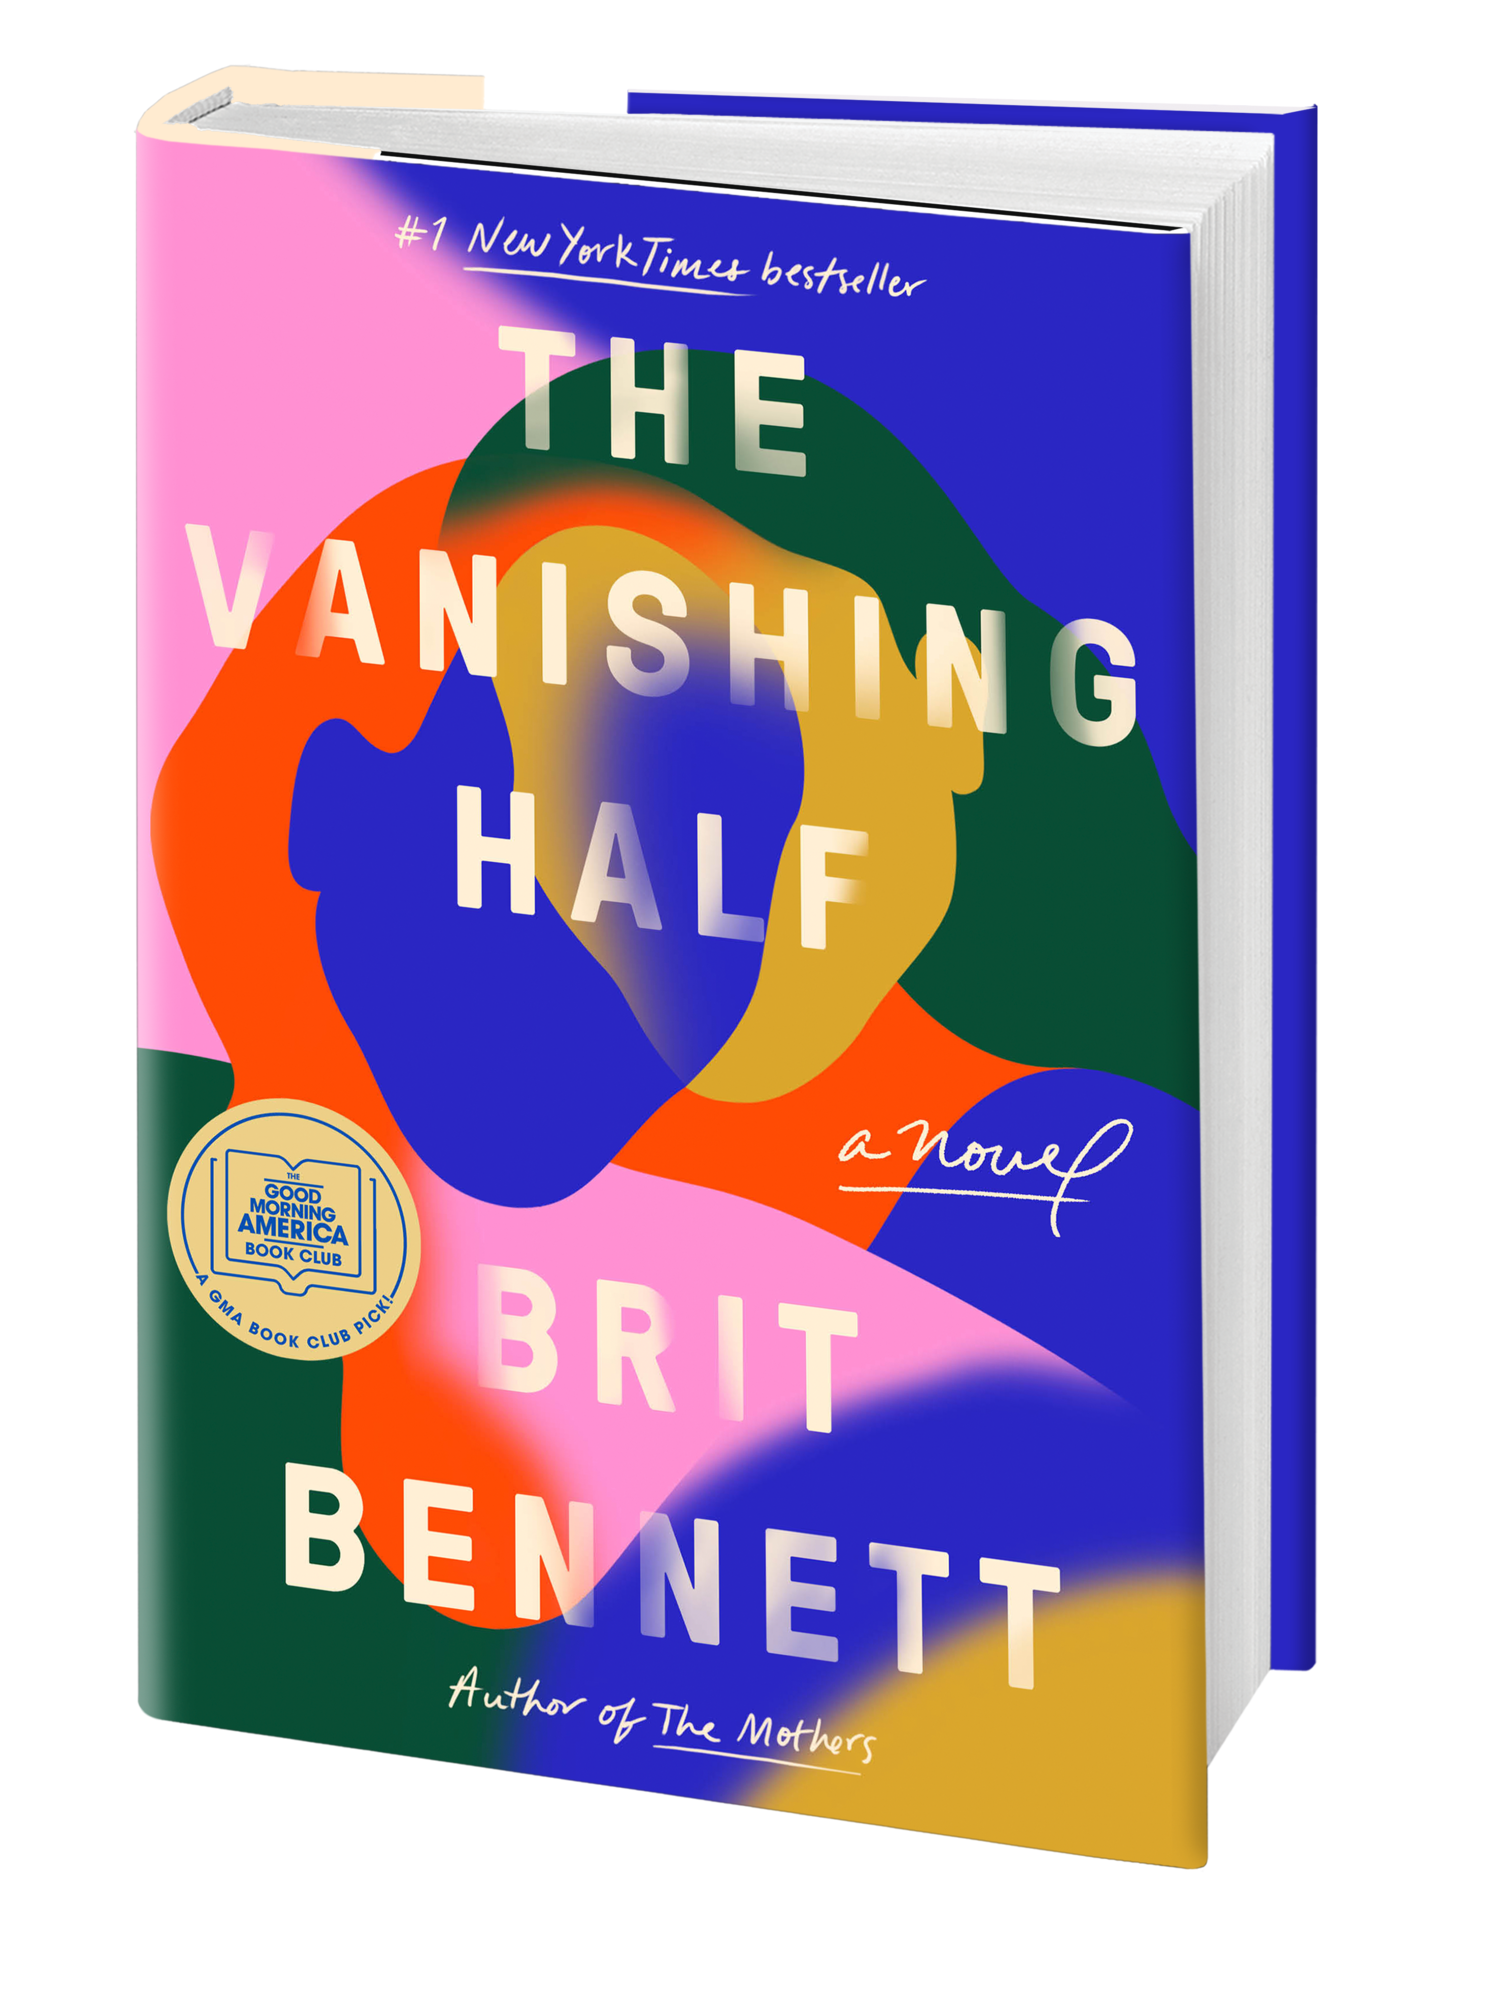 Colorful cover of the Vanishing Half